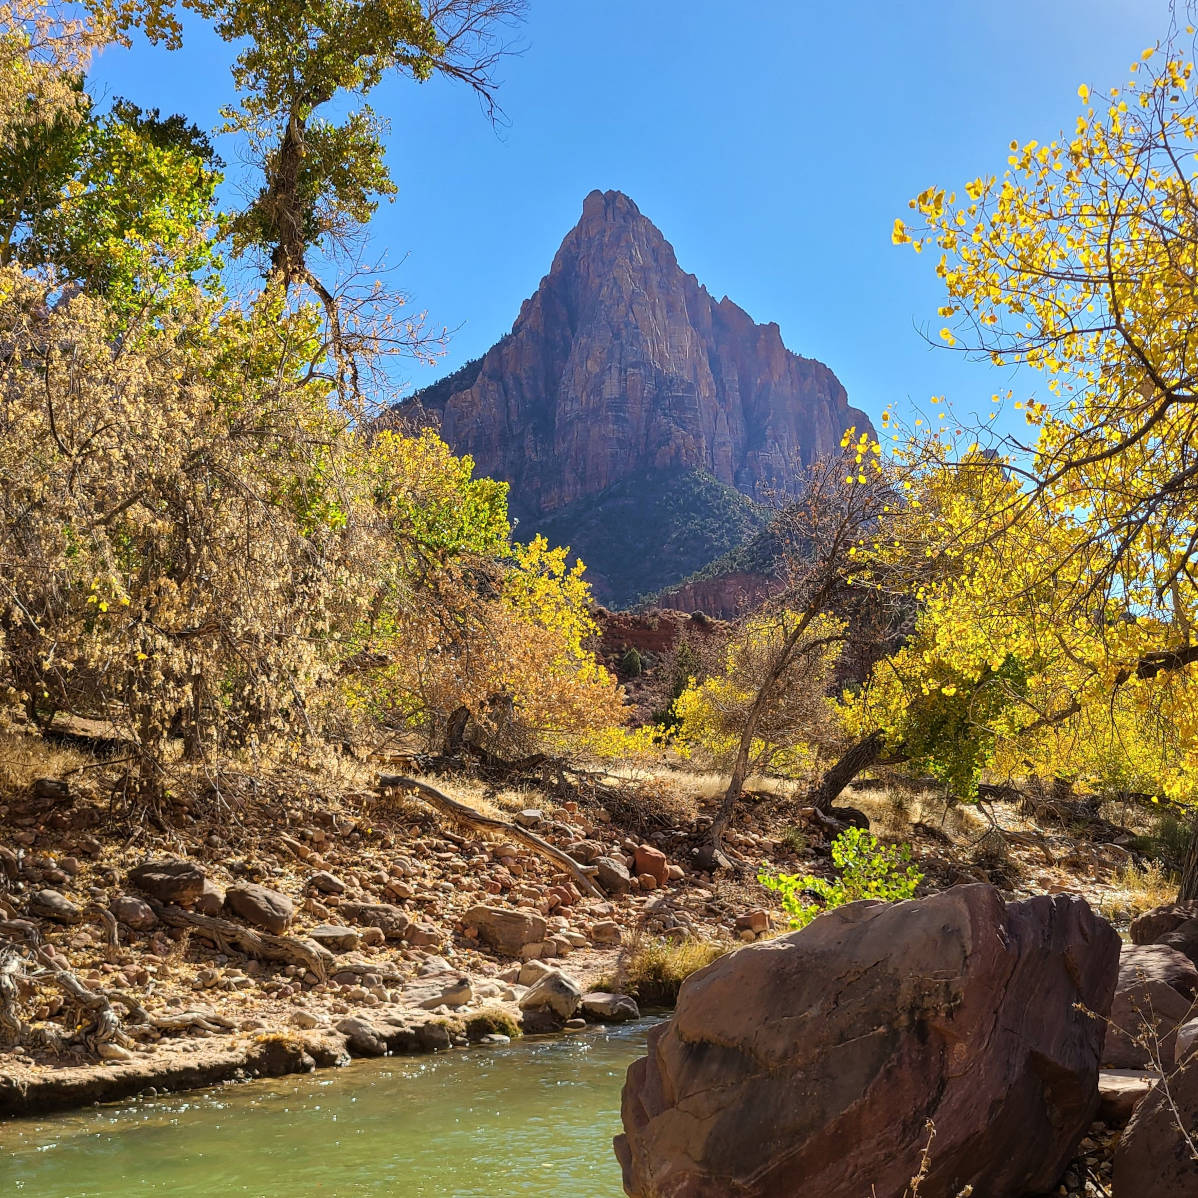 View of The Watchman from the Virgin River in Zion National Park - HelloTrail